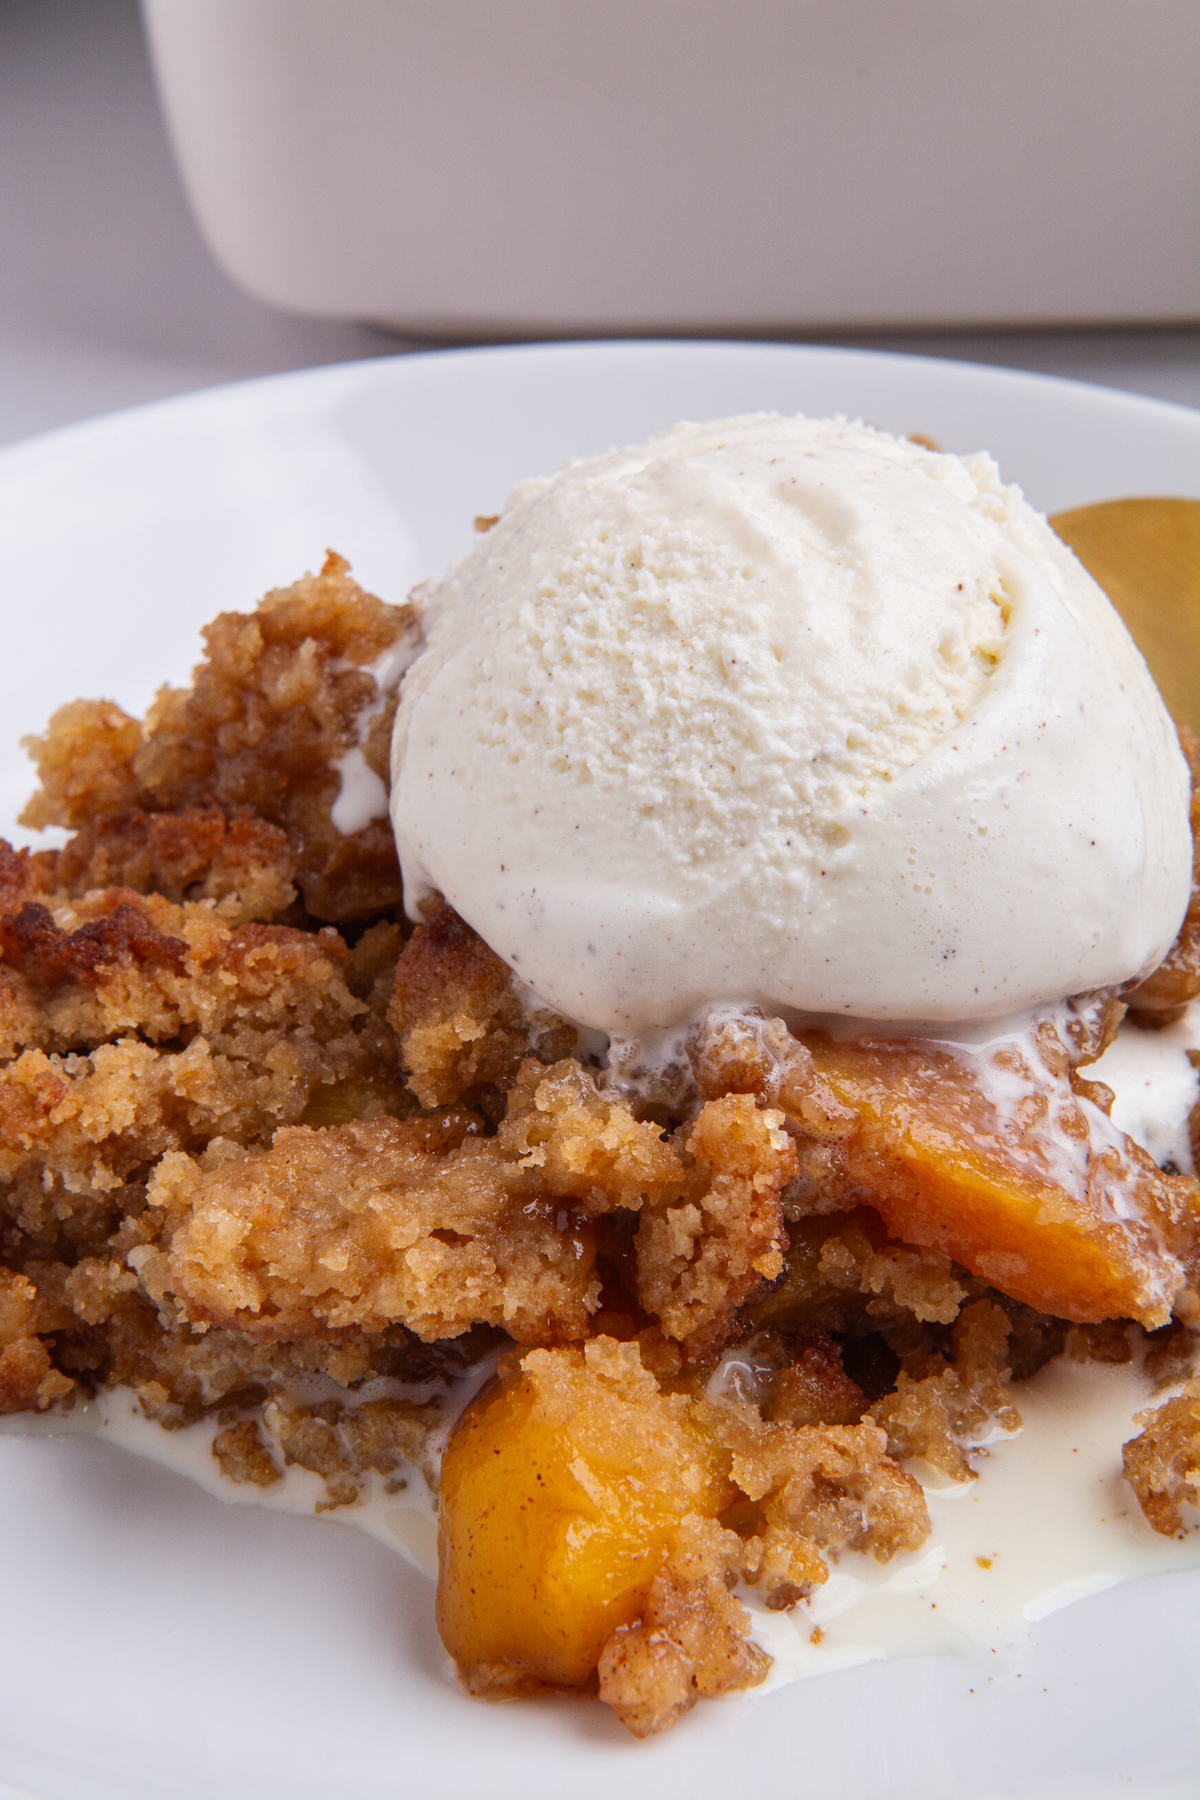 A serving of peach cobbler topped with a scoop of vanilla ice cream.